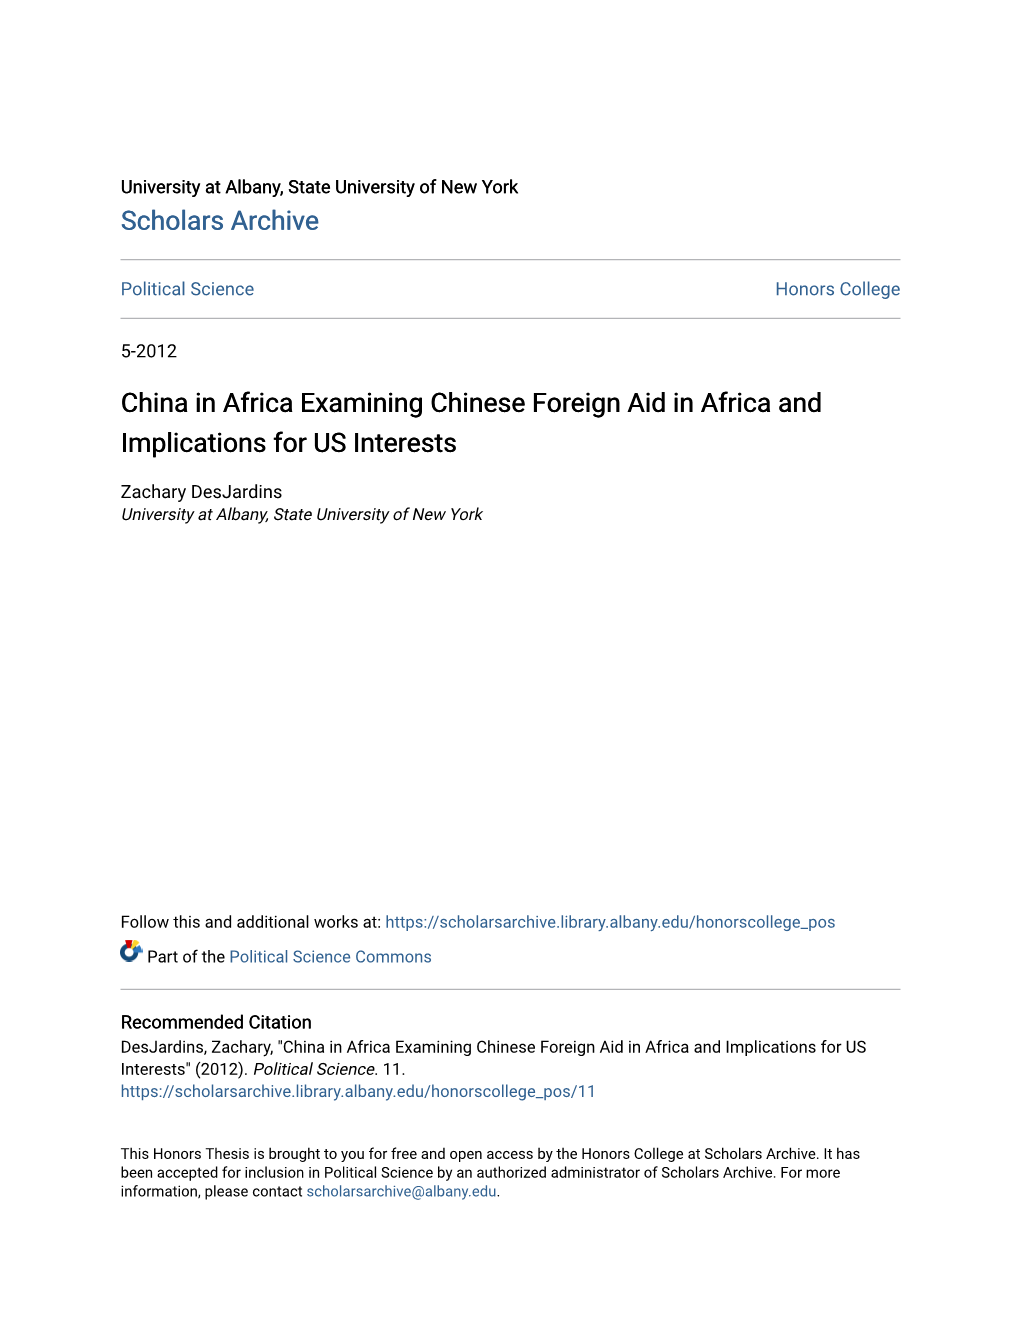 China in Africa Examining Chinese Foreign Aid in Africa and Implications for US Interests